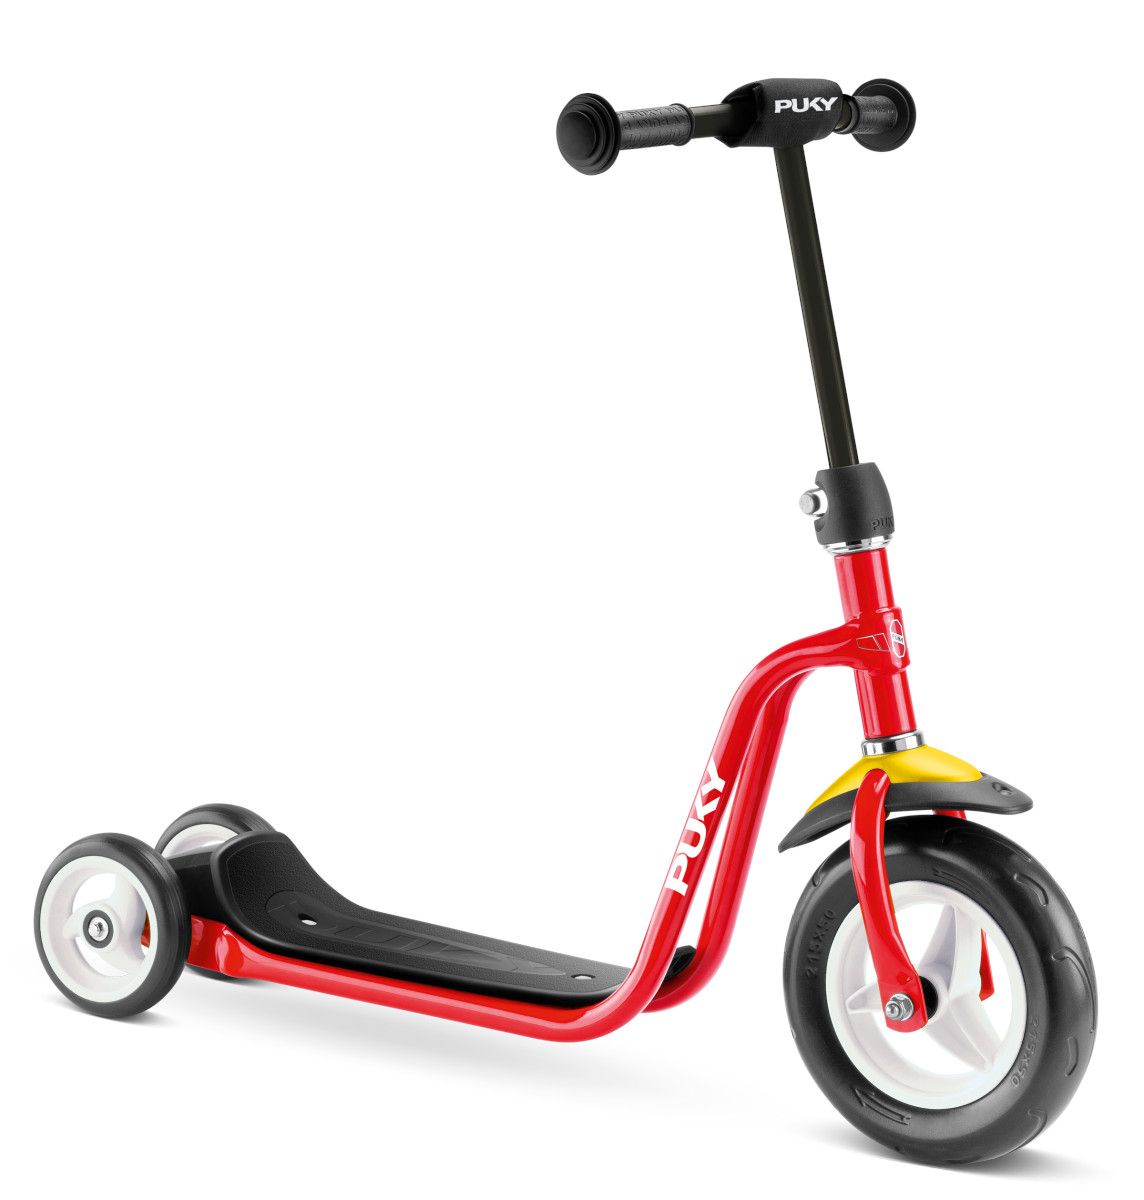 Puky Roller R 1 Puky color new red - Fahrrad Online Shop